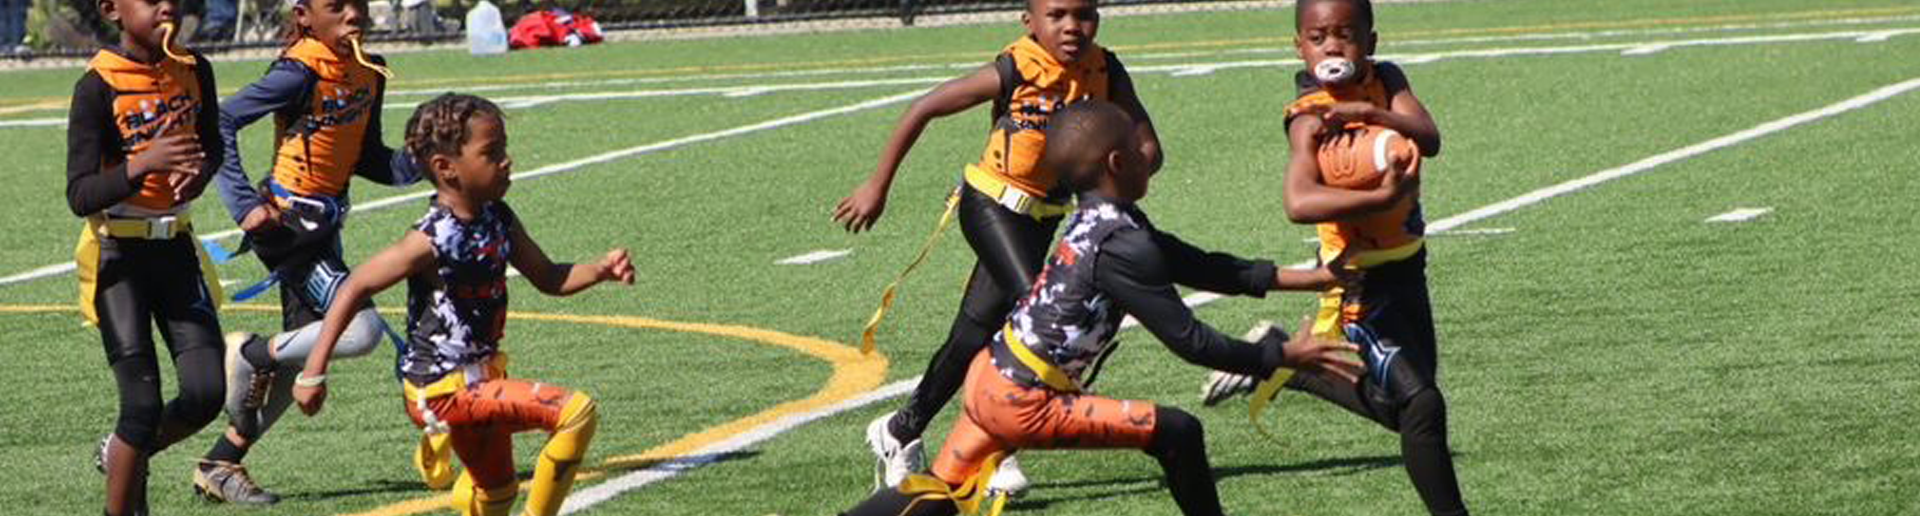 LYA Flag Football for ages 6 and 7